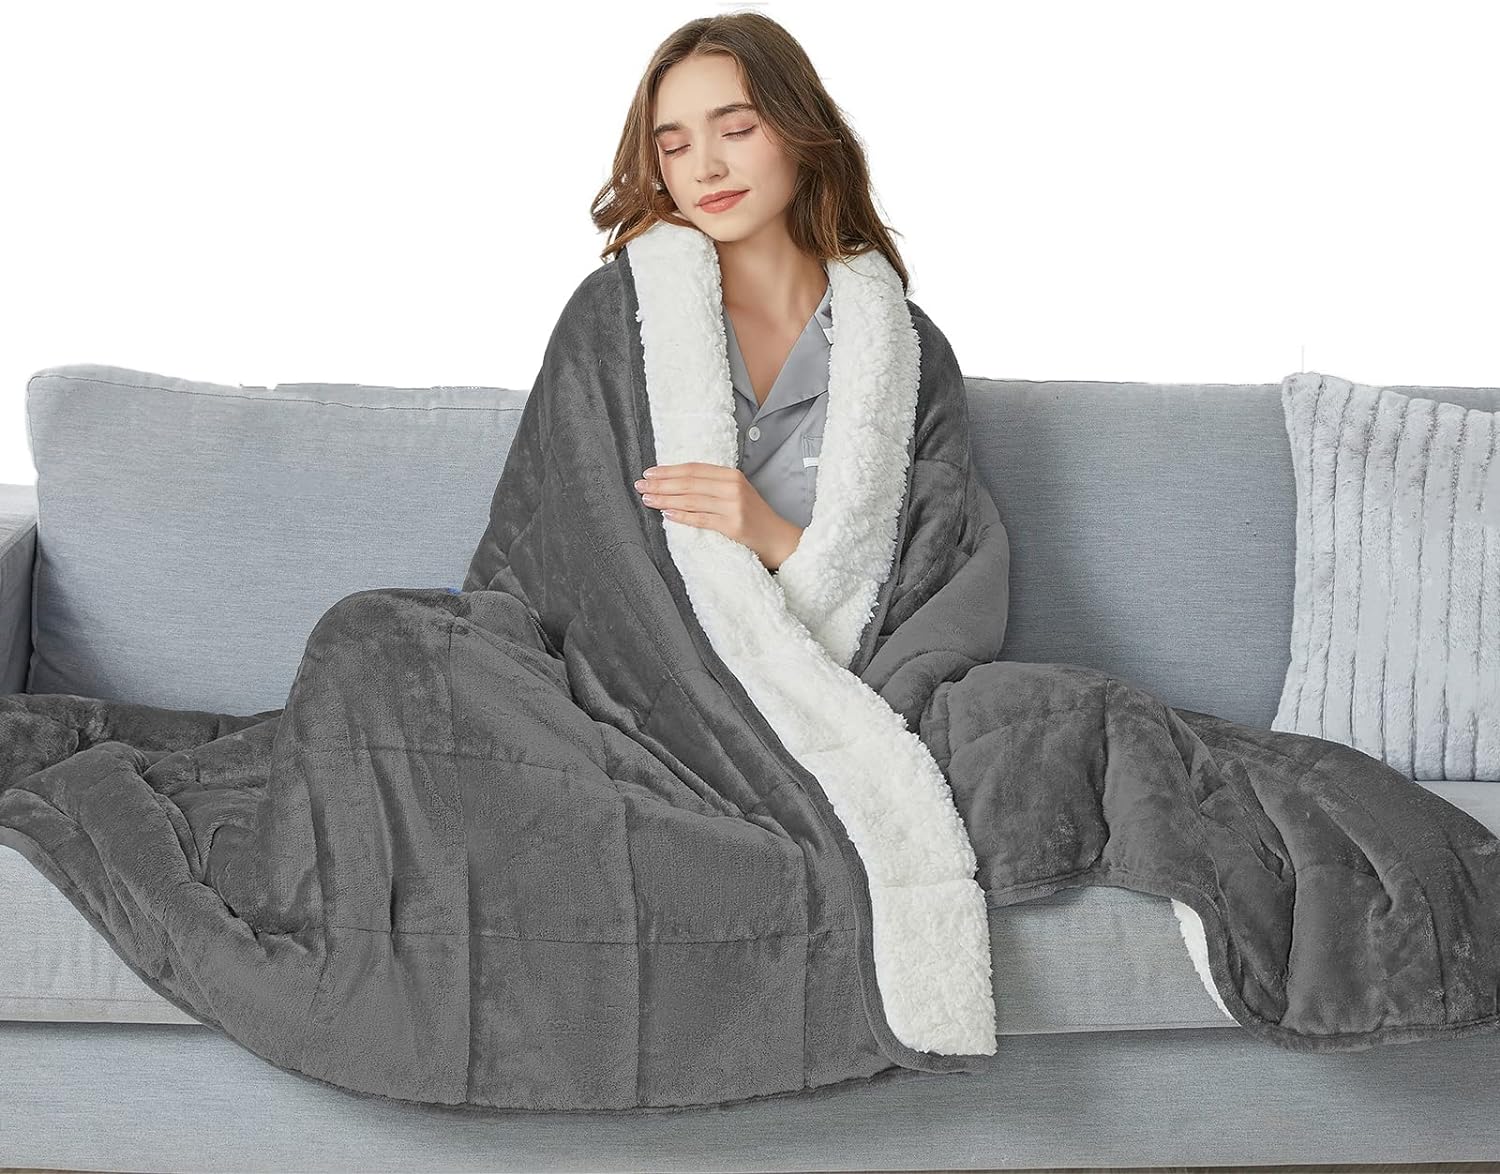 Quality product for a great price. Material is warm and fluffy one side then cool fleece on the other. Weighted blanket for its intended use and has some stress relieving implications.